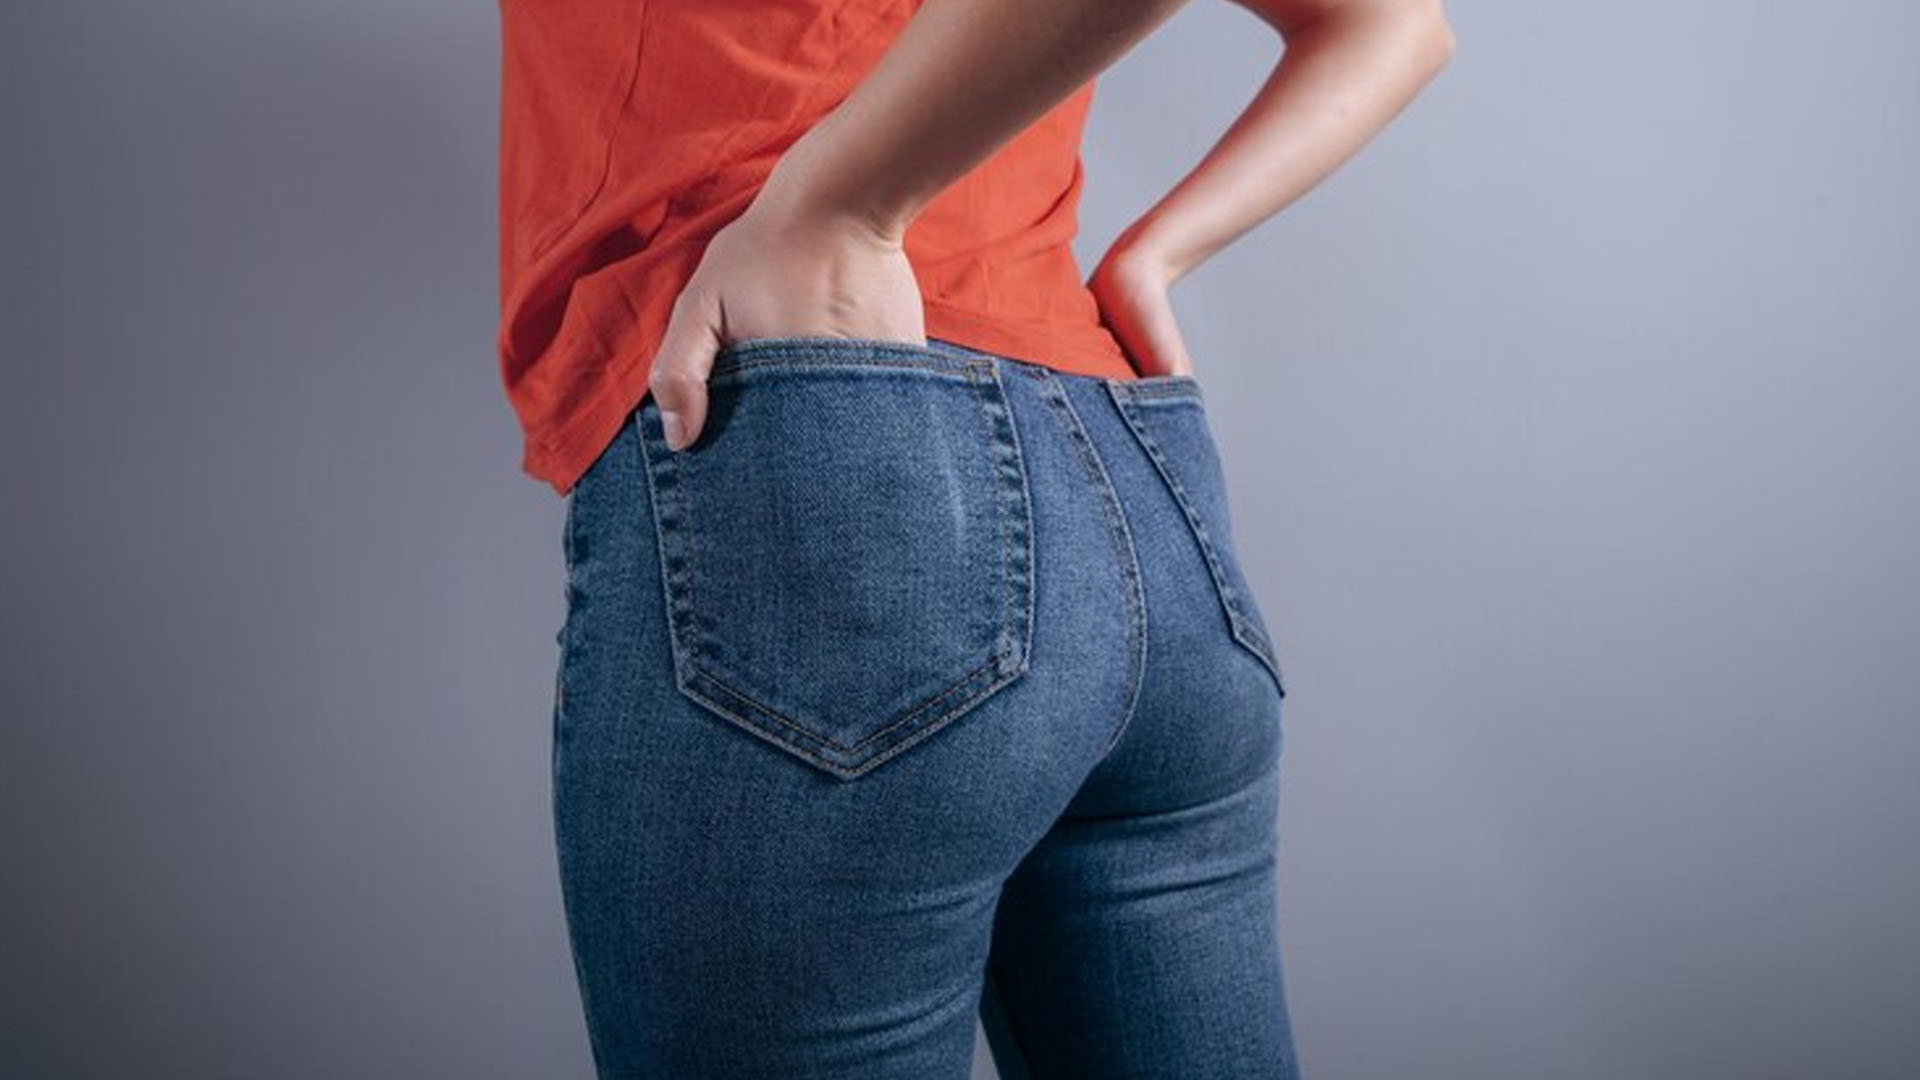 What are the Home Remedies for Boils on Buttocks?